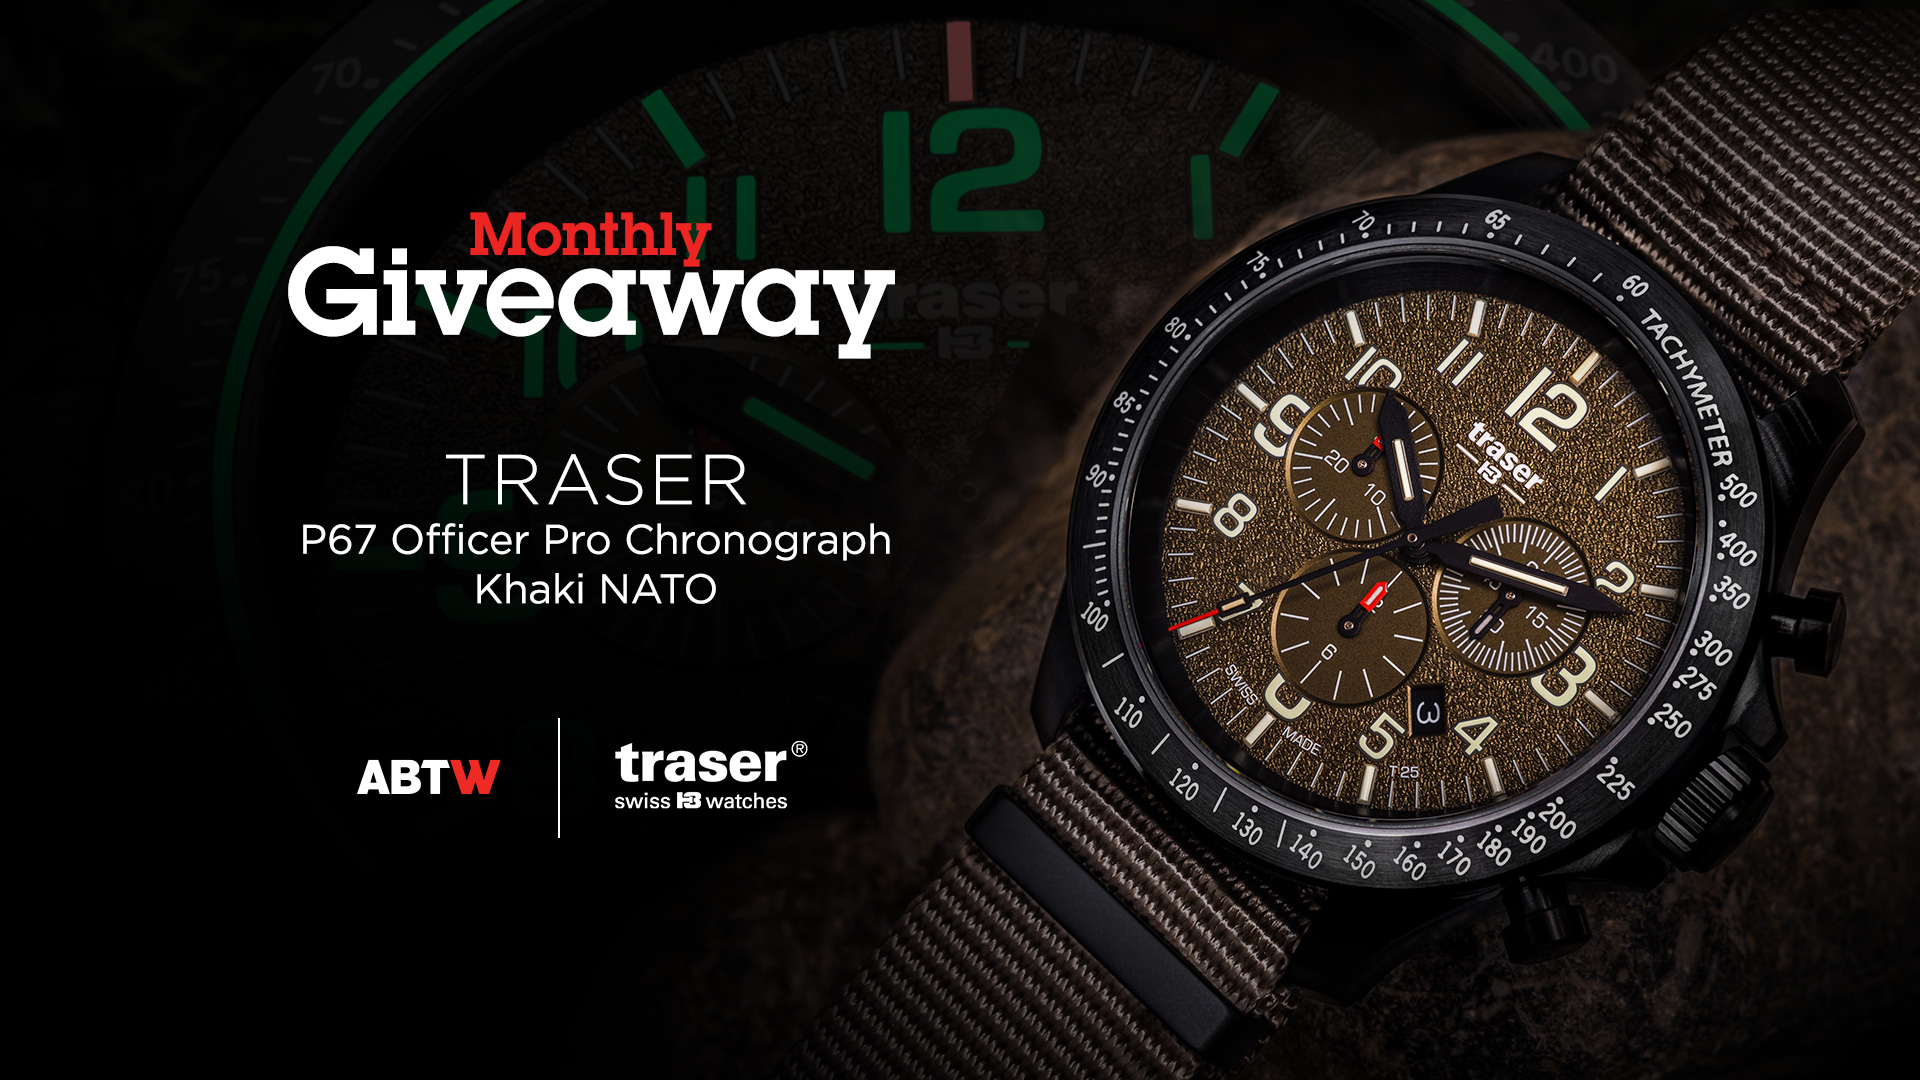 Winner Announced: Traser P67 Officer Pro Chronograph Watch